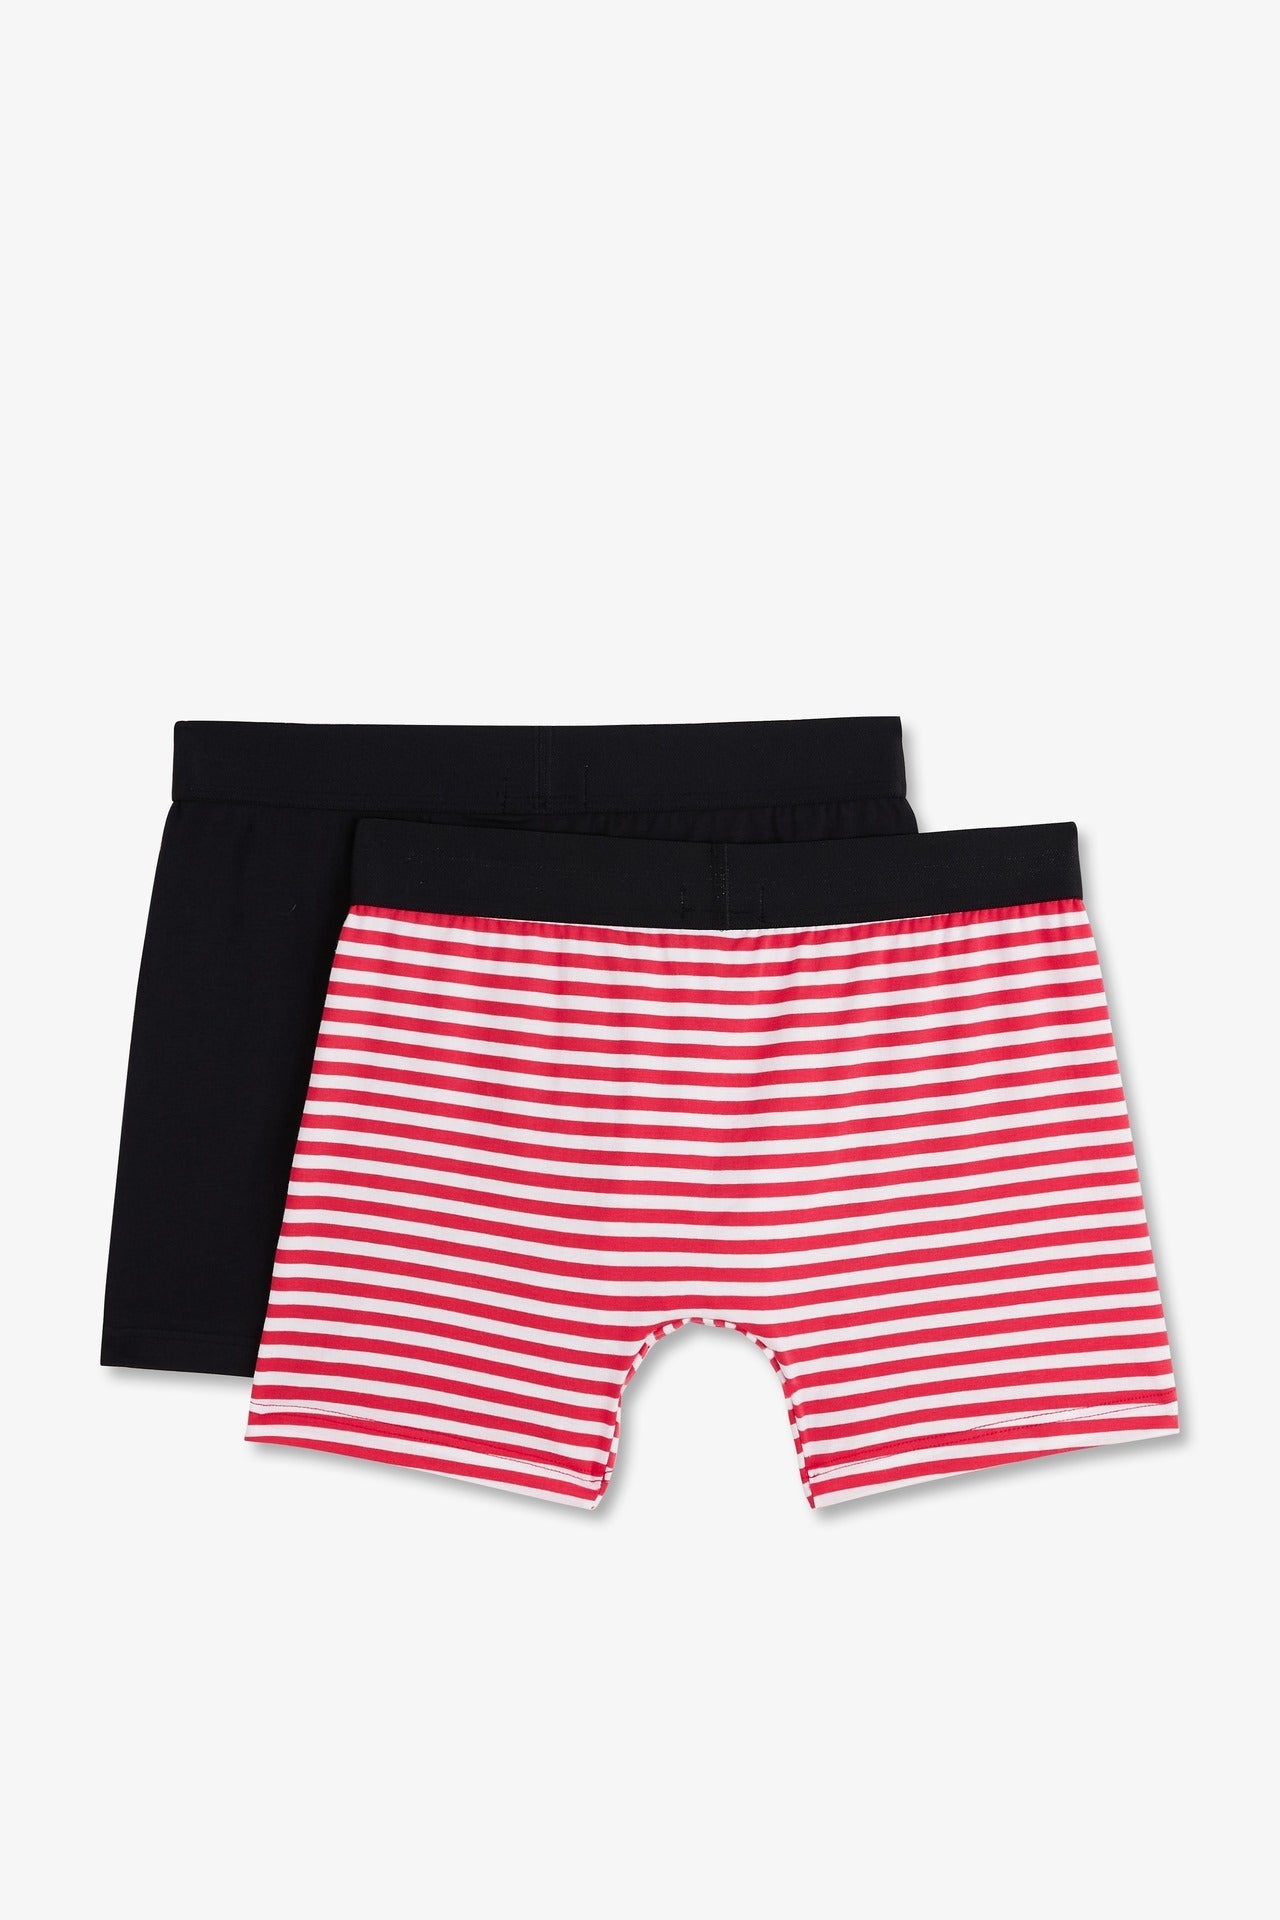 Pack of 2 striped red and navy  boxers in stretch cotton - Image 6